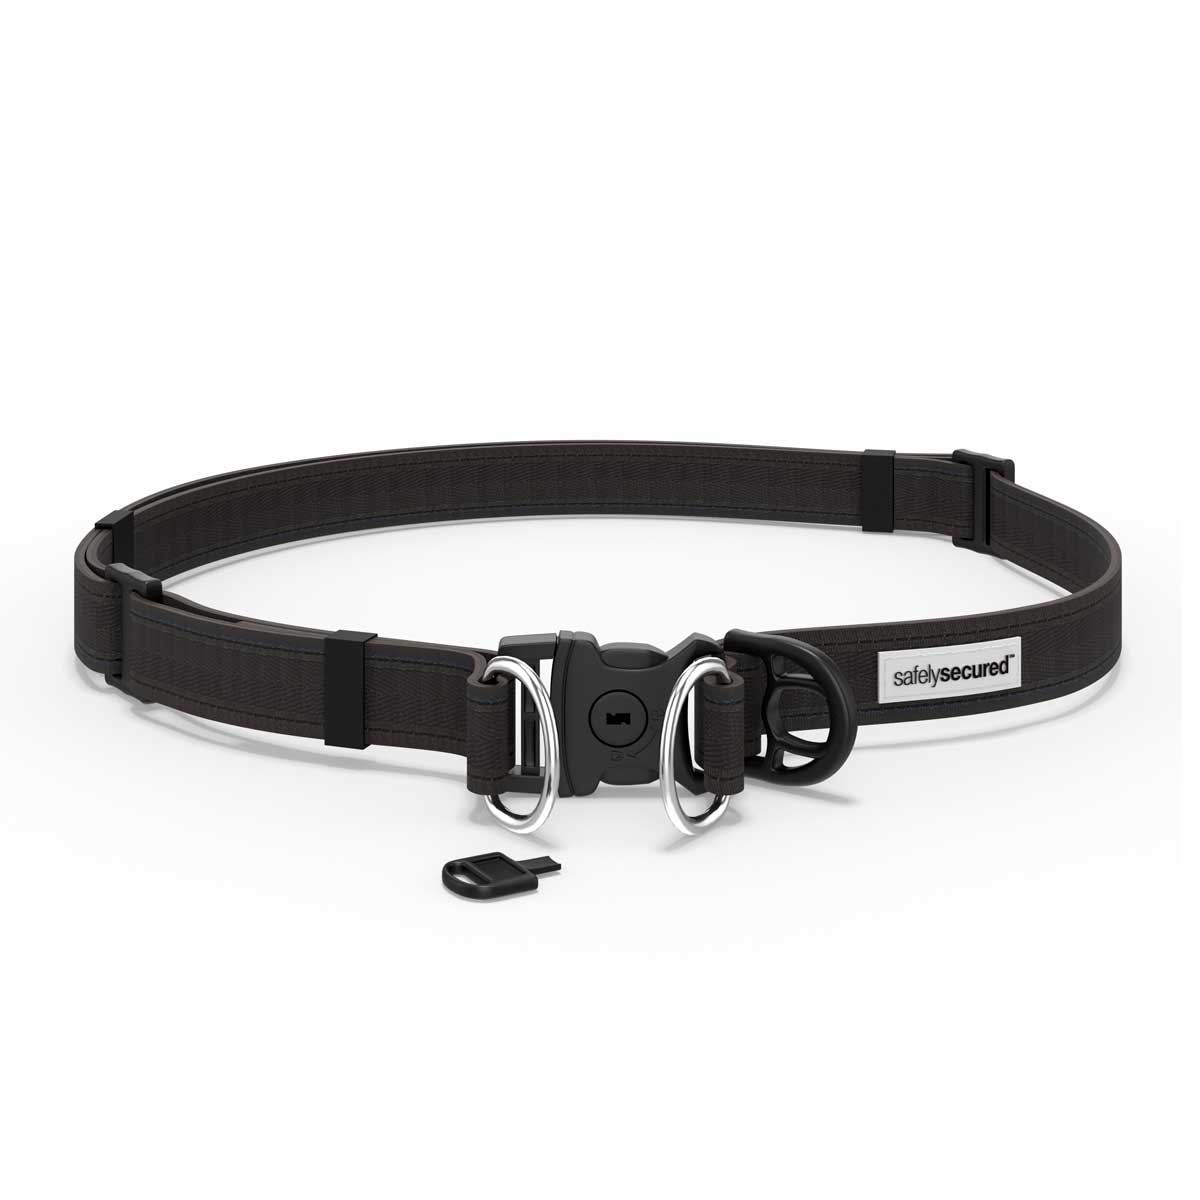 Safely Secured Anti-theft belt on white background